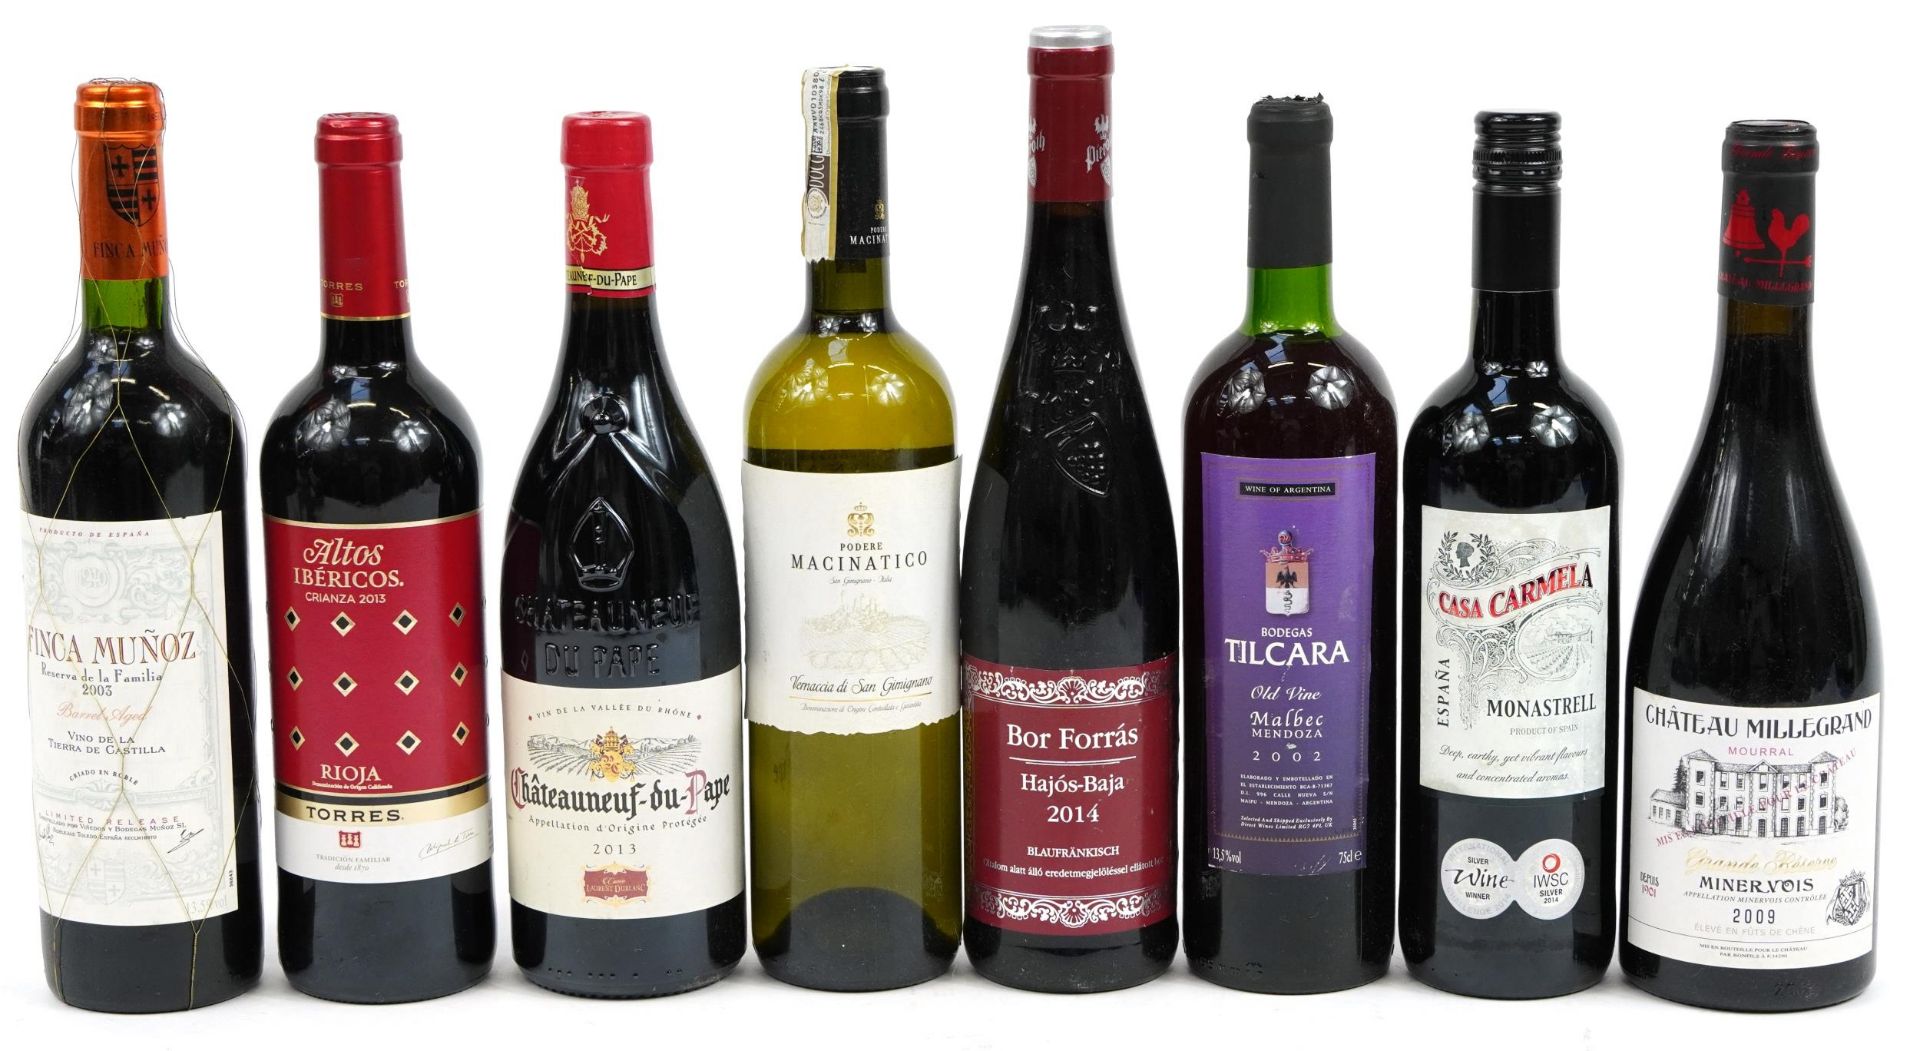 Seven bottles of wine including 2009 Chateau Millegrand Minervios, 2013 Chateau Neuf du Pape and